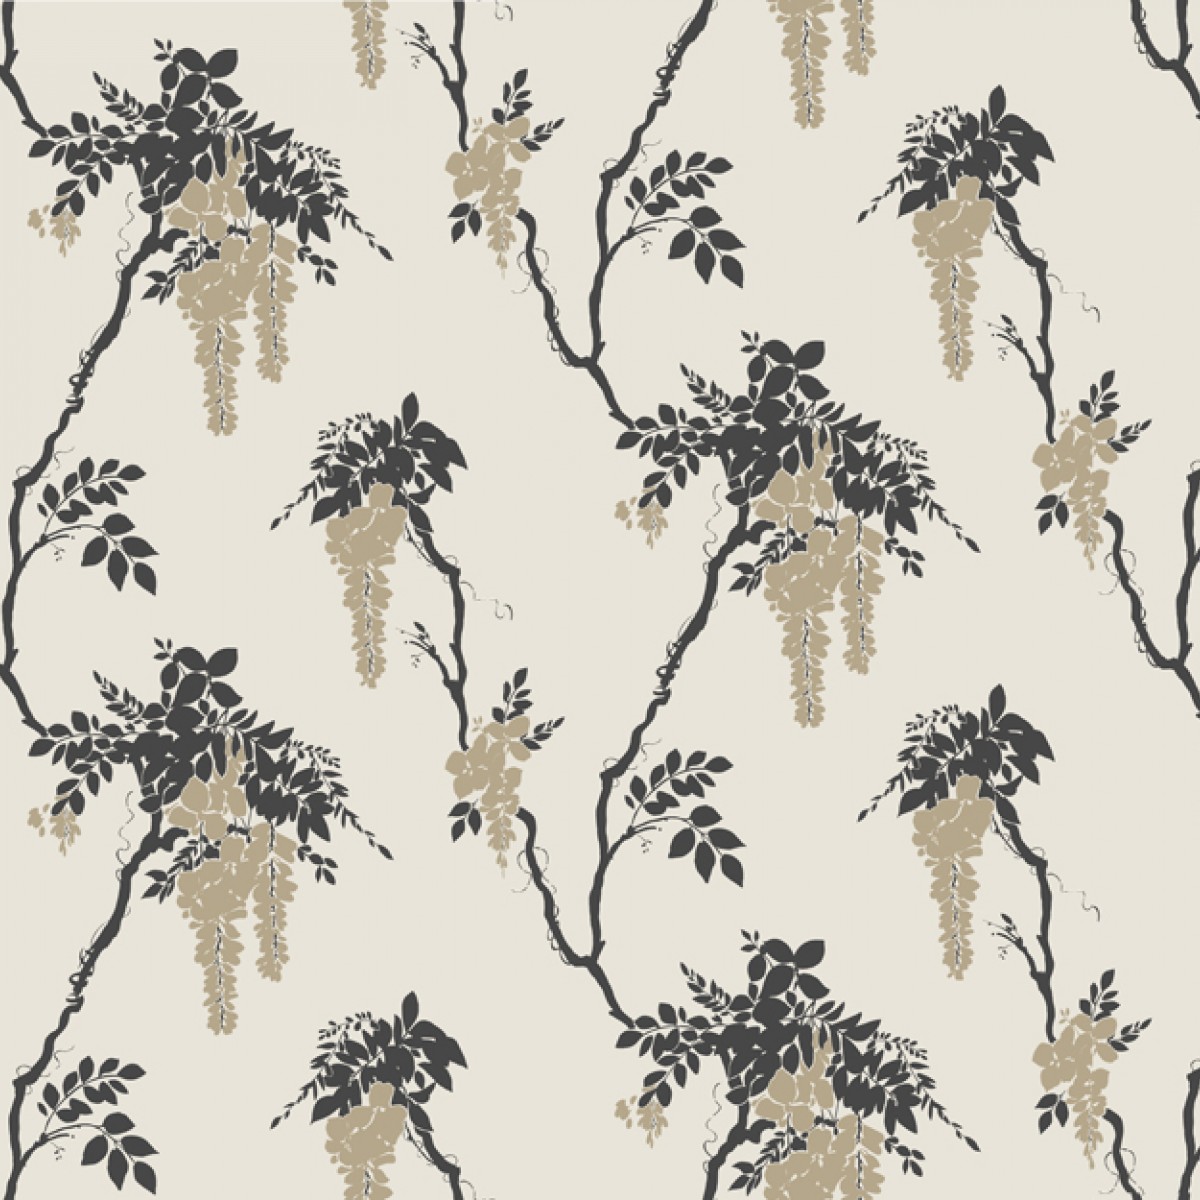 Tapet Leonora, Gold and Black Luxury Floral, 1838 Wallcoverings, 5.3mp / rola, Tapet living 